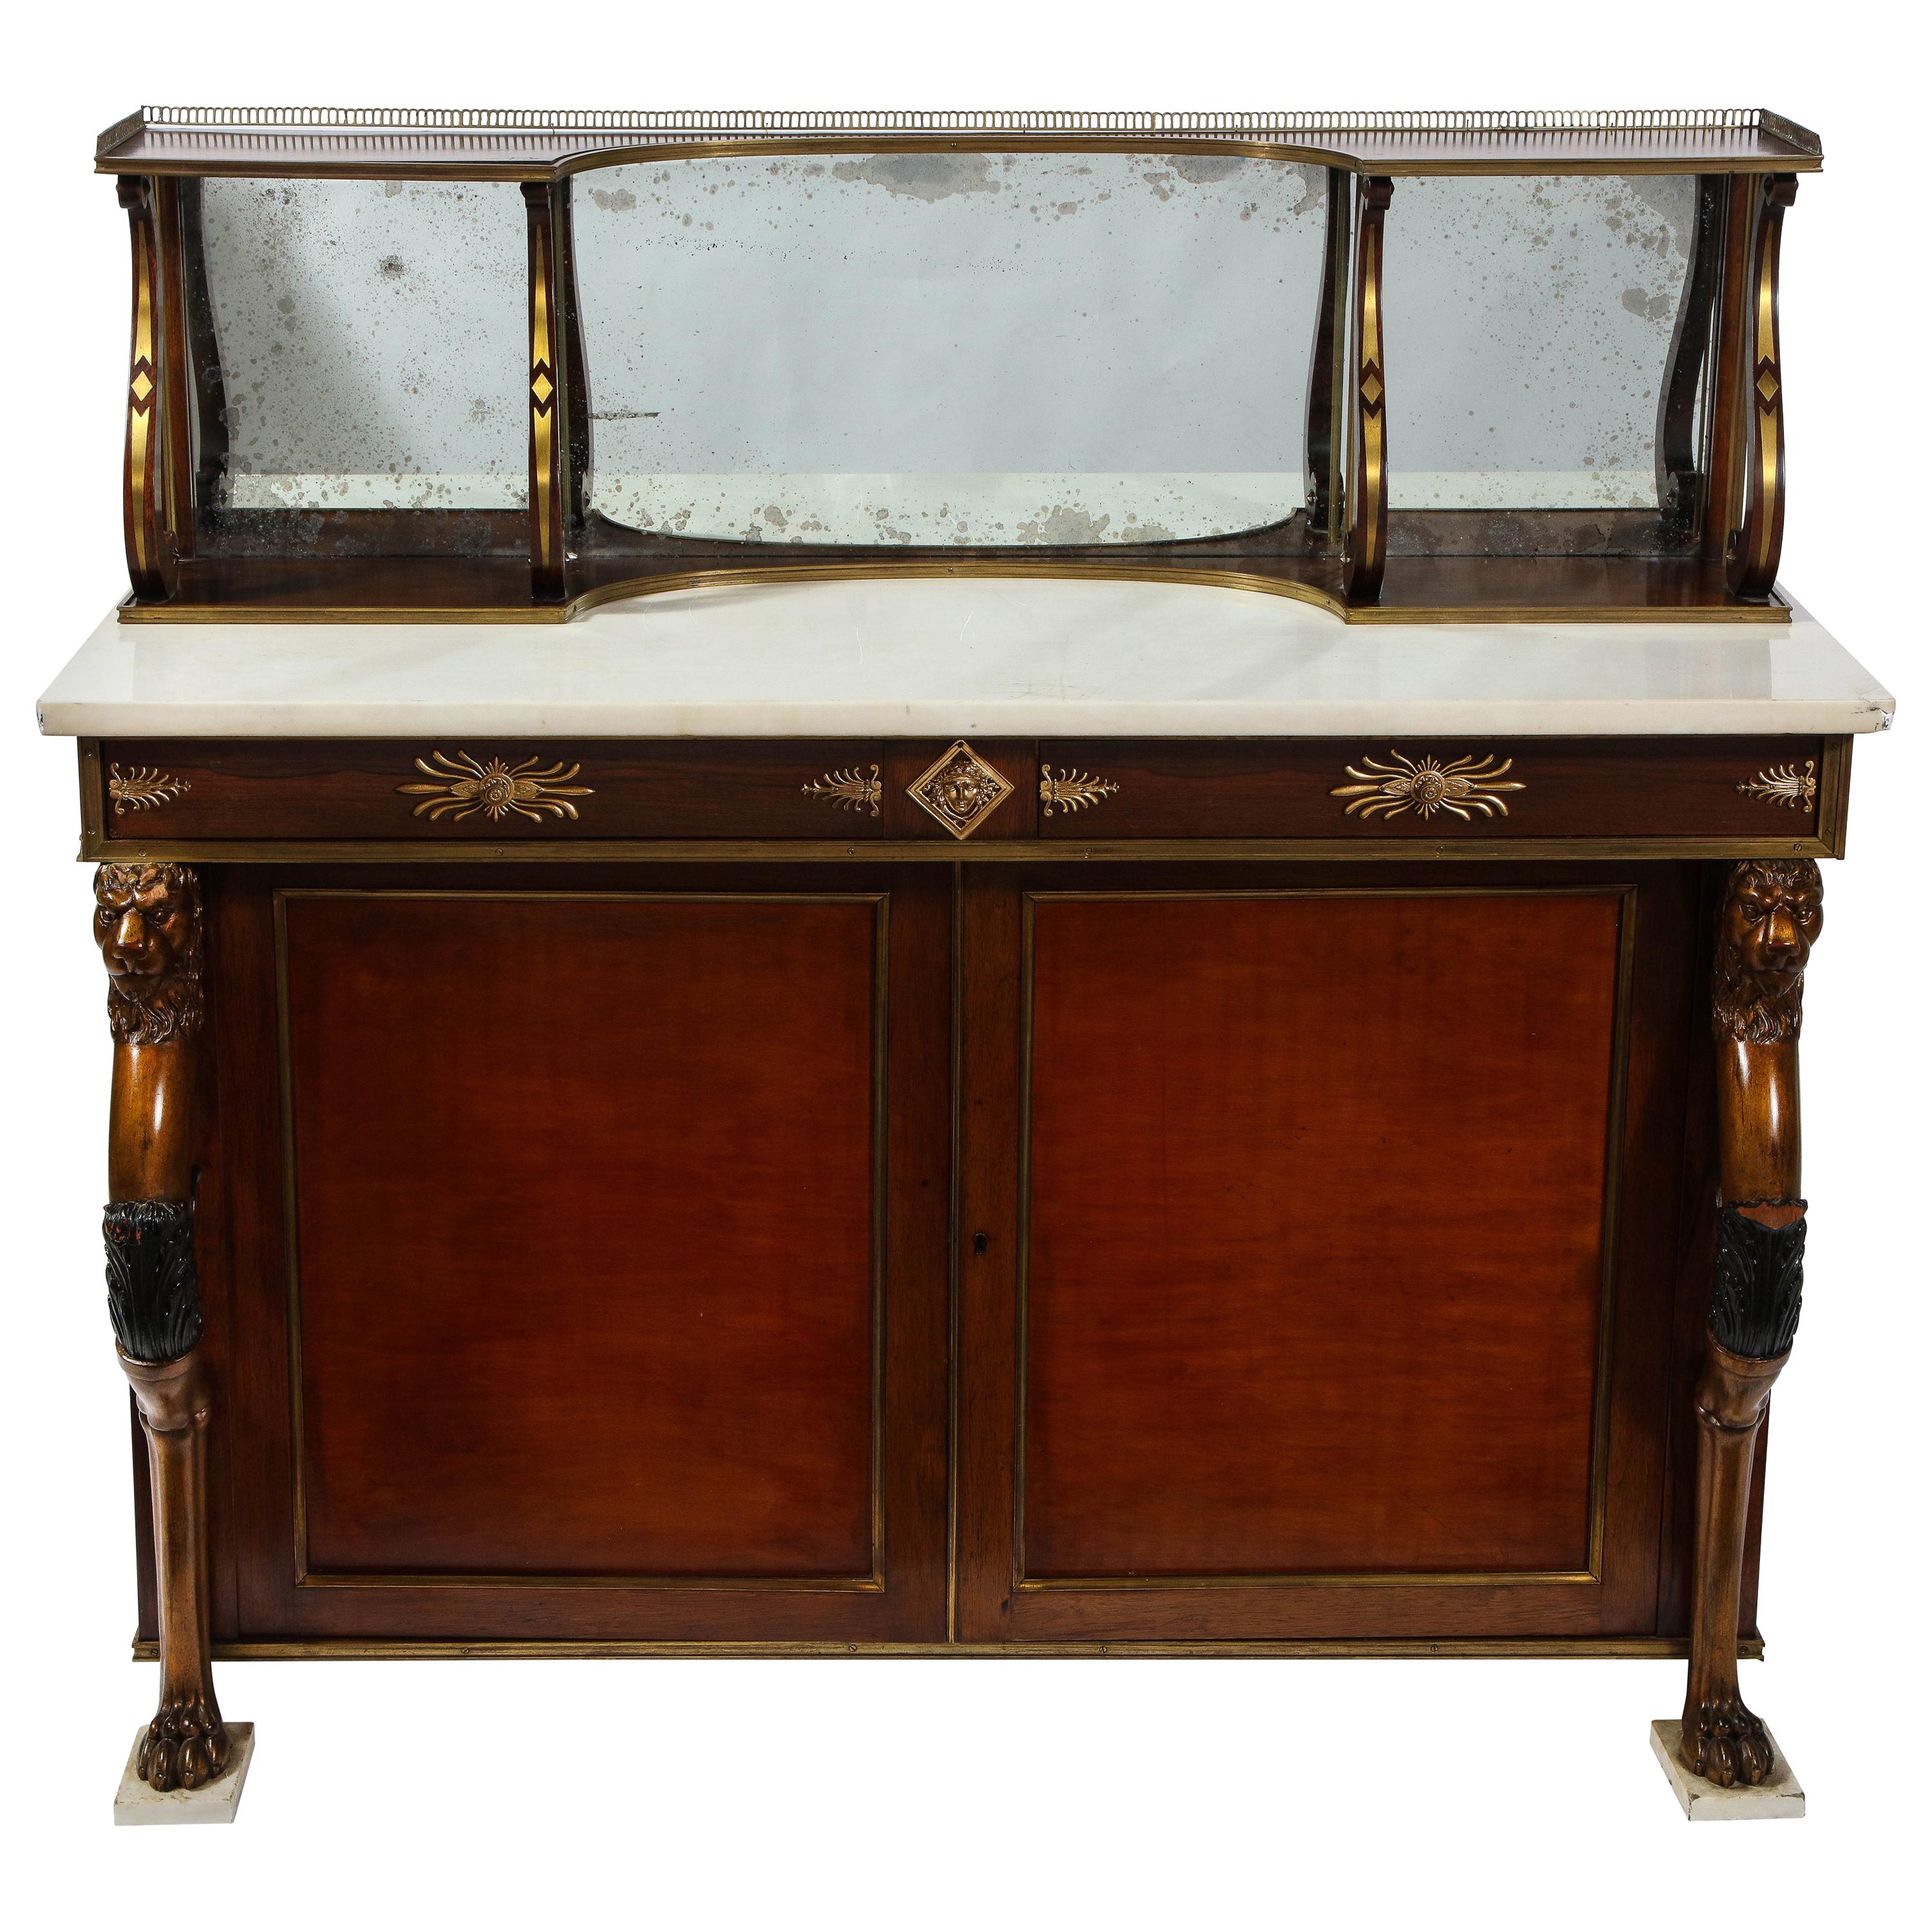 An English Regency ormolu-mounted Chiffonier/sideboard with a Carrara marble top, having hand carved figural wooden lion supports and removable lyre form mirrored shelf. This is truly an extravagant piece that can be utilized for different room